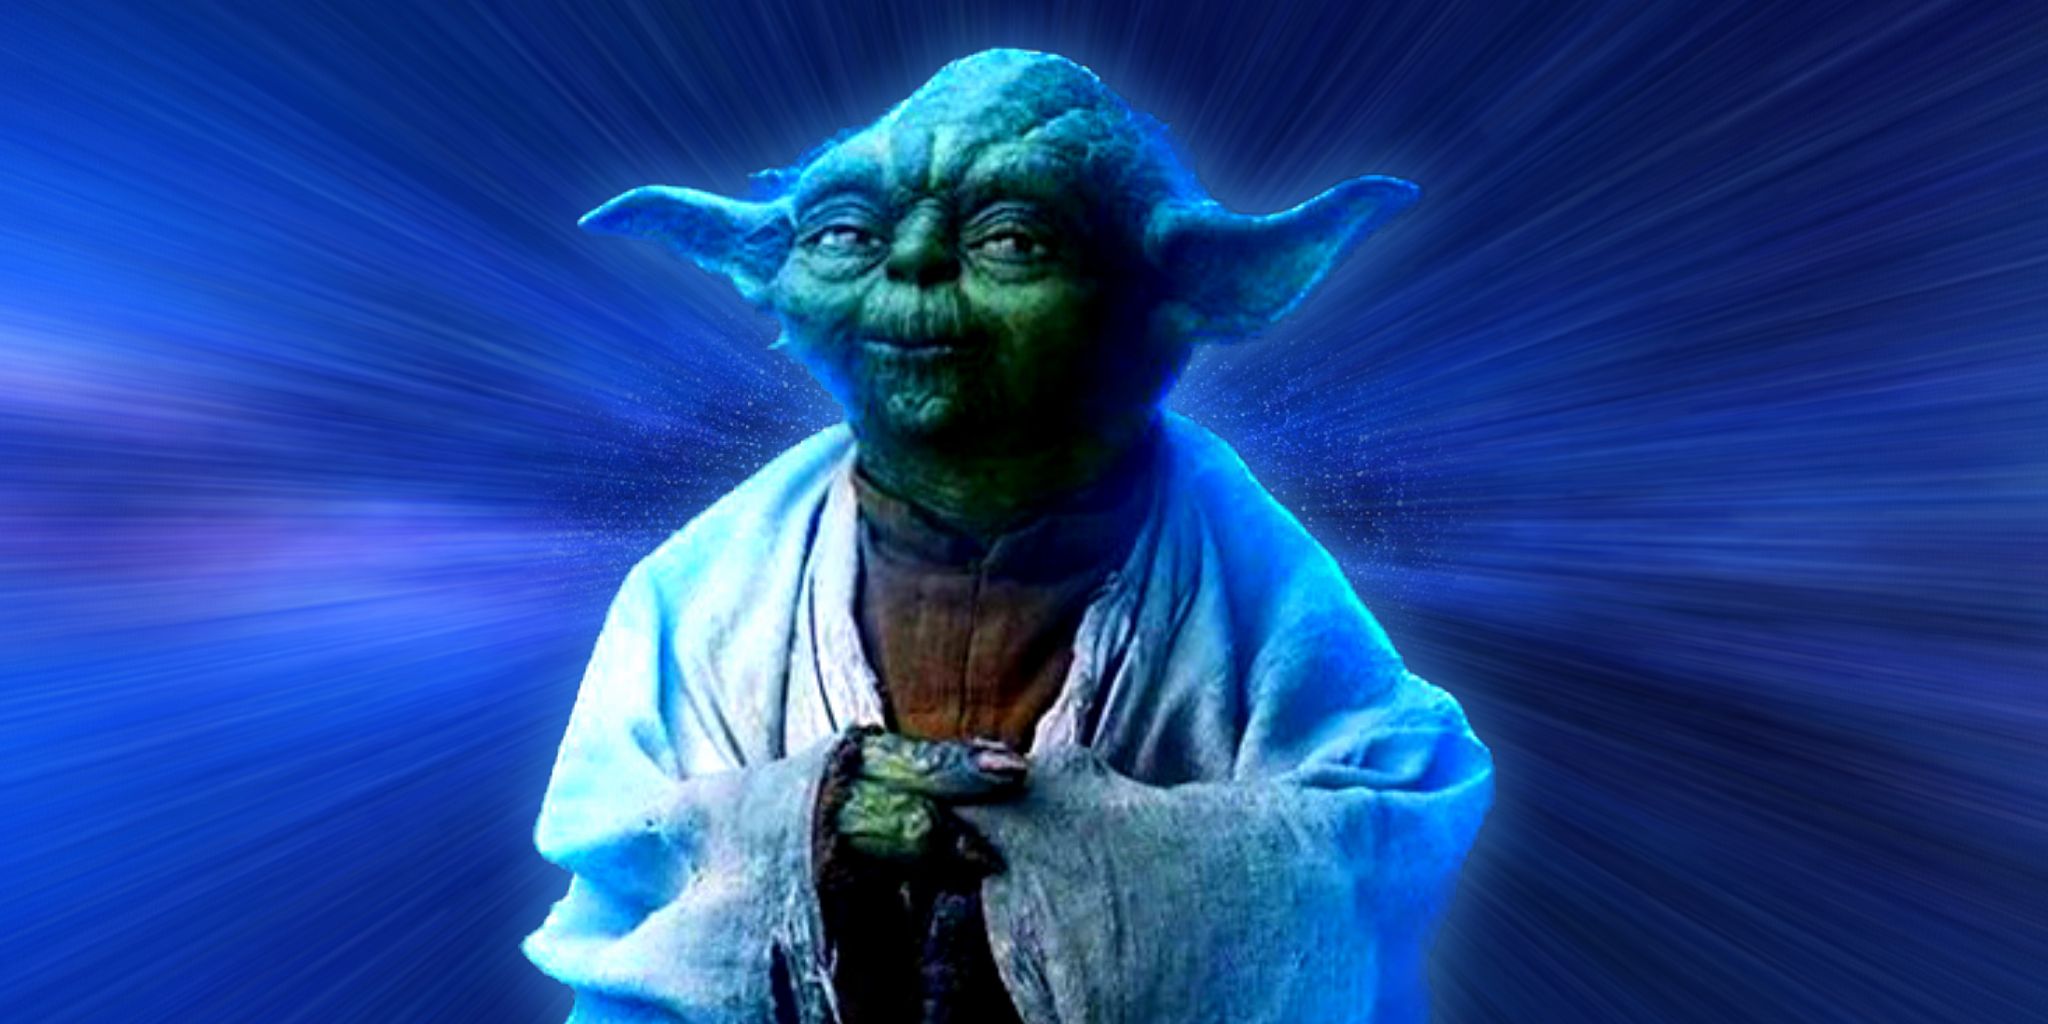 Yoda's Force ghost with a blurred background of stars